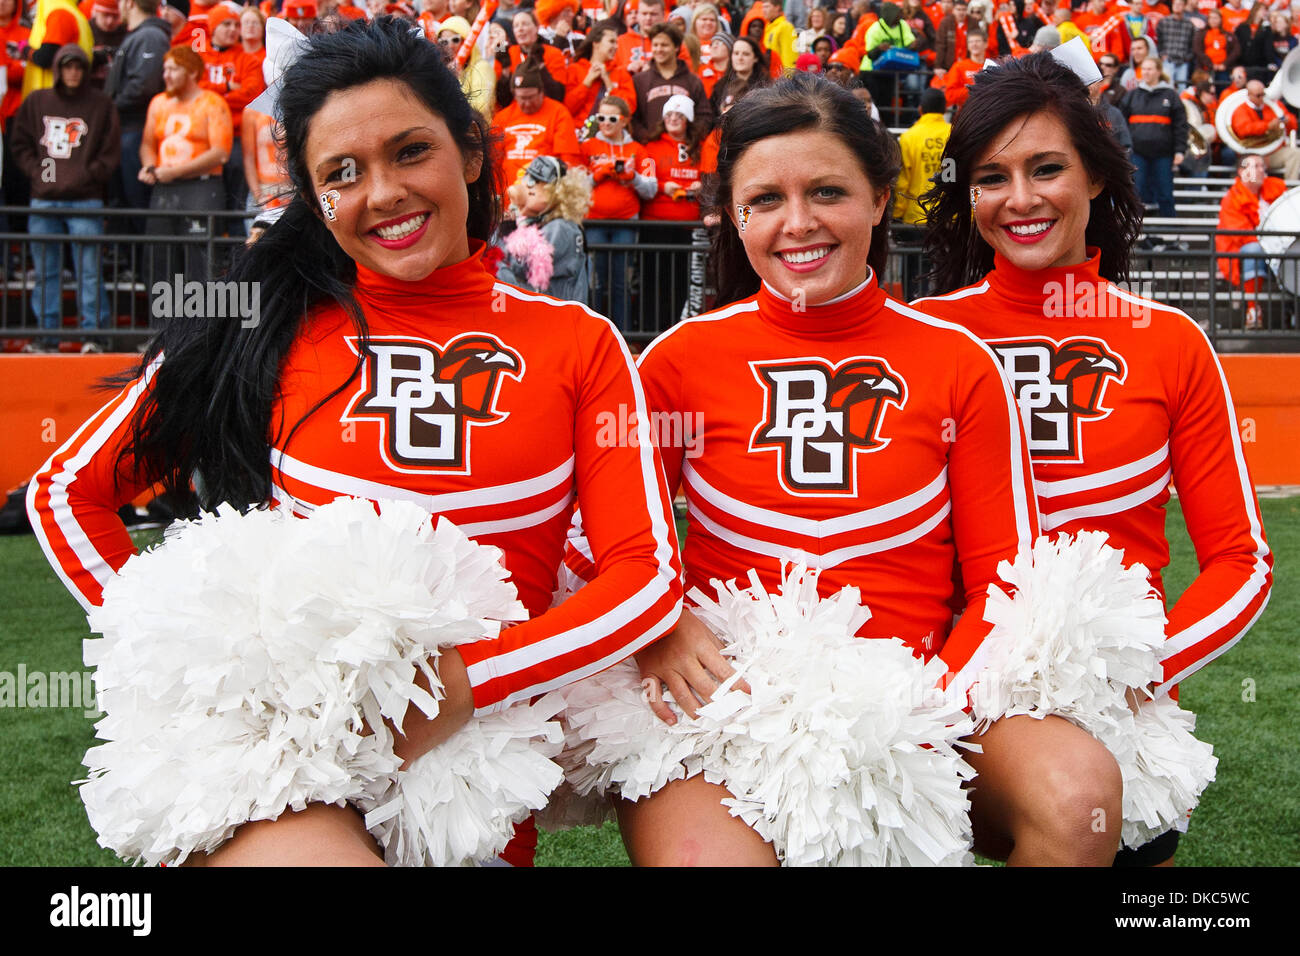 oct-15-2011-bowling-green-ohio-us-the-bowling-green-cheerleaders-during-DKC5WC.jpg